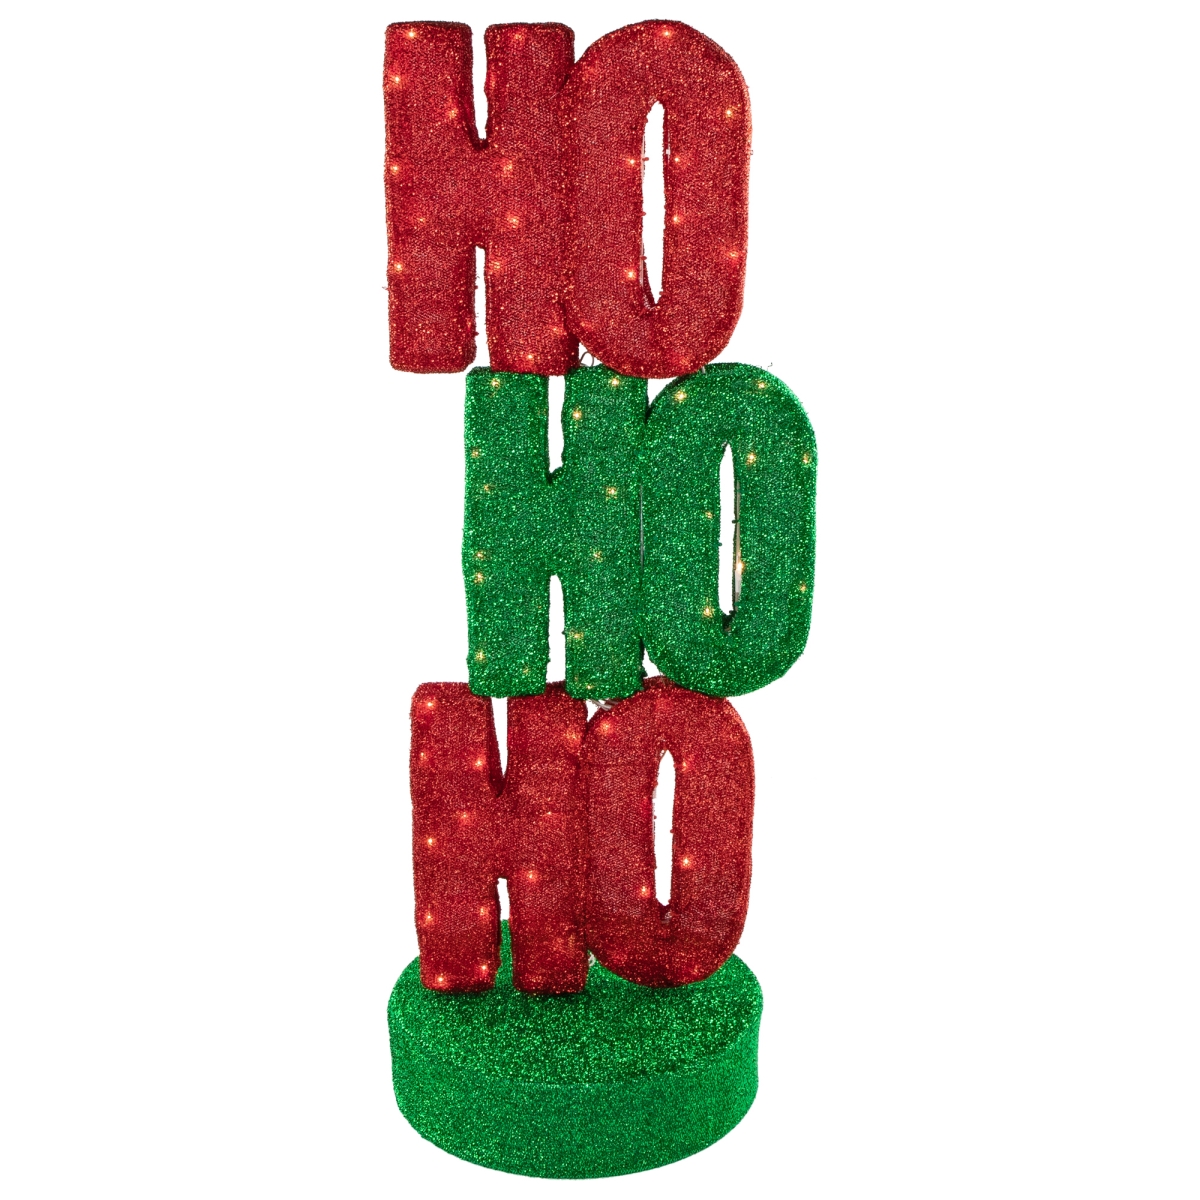 Northlight 35164351 39 in. Lighted Red & Green Ho Ho Ho Outdoor Christmas Sign Decoration